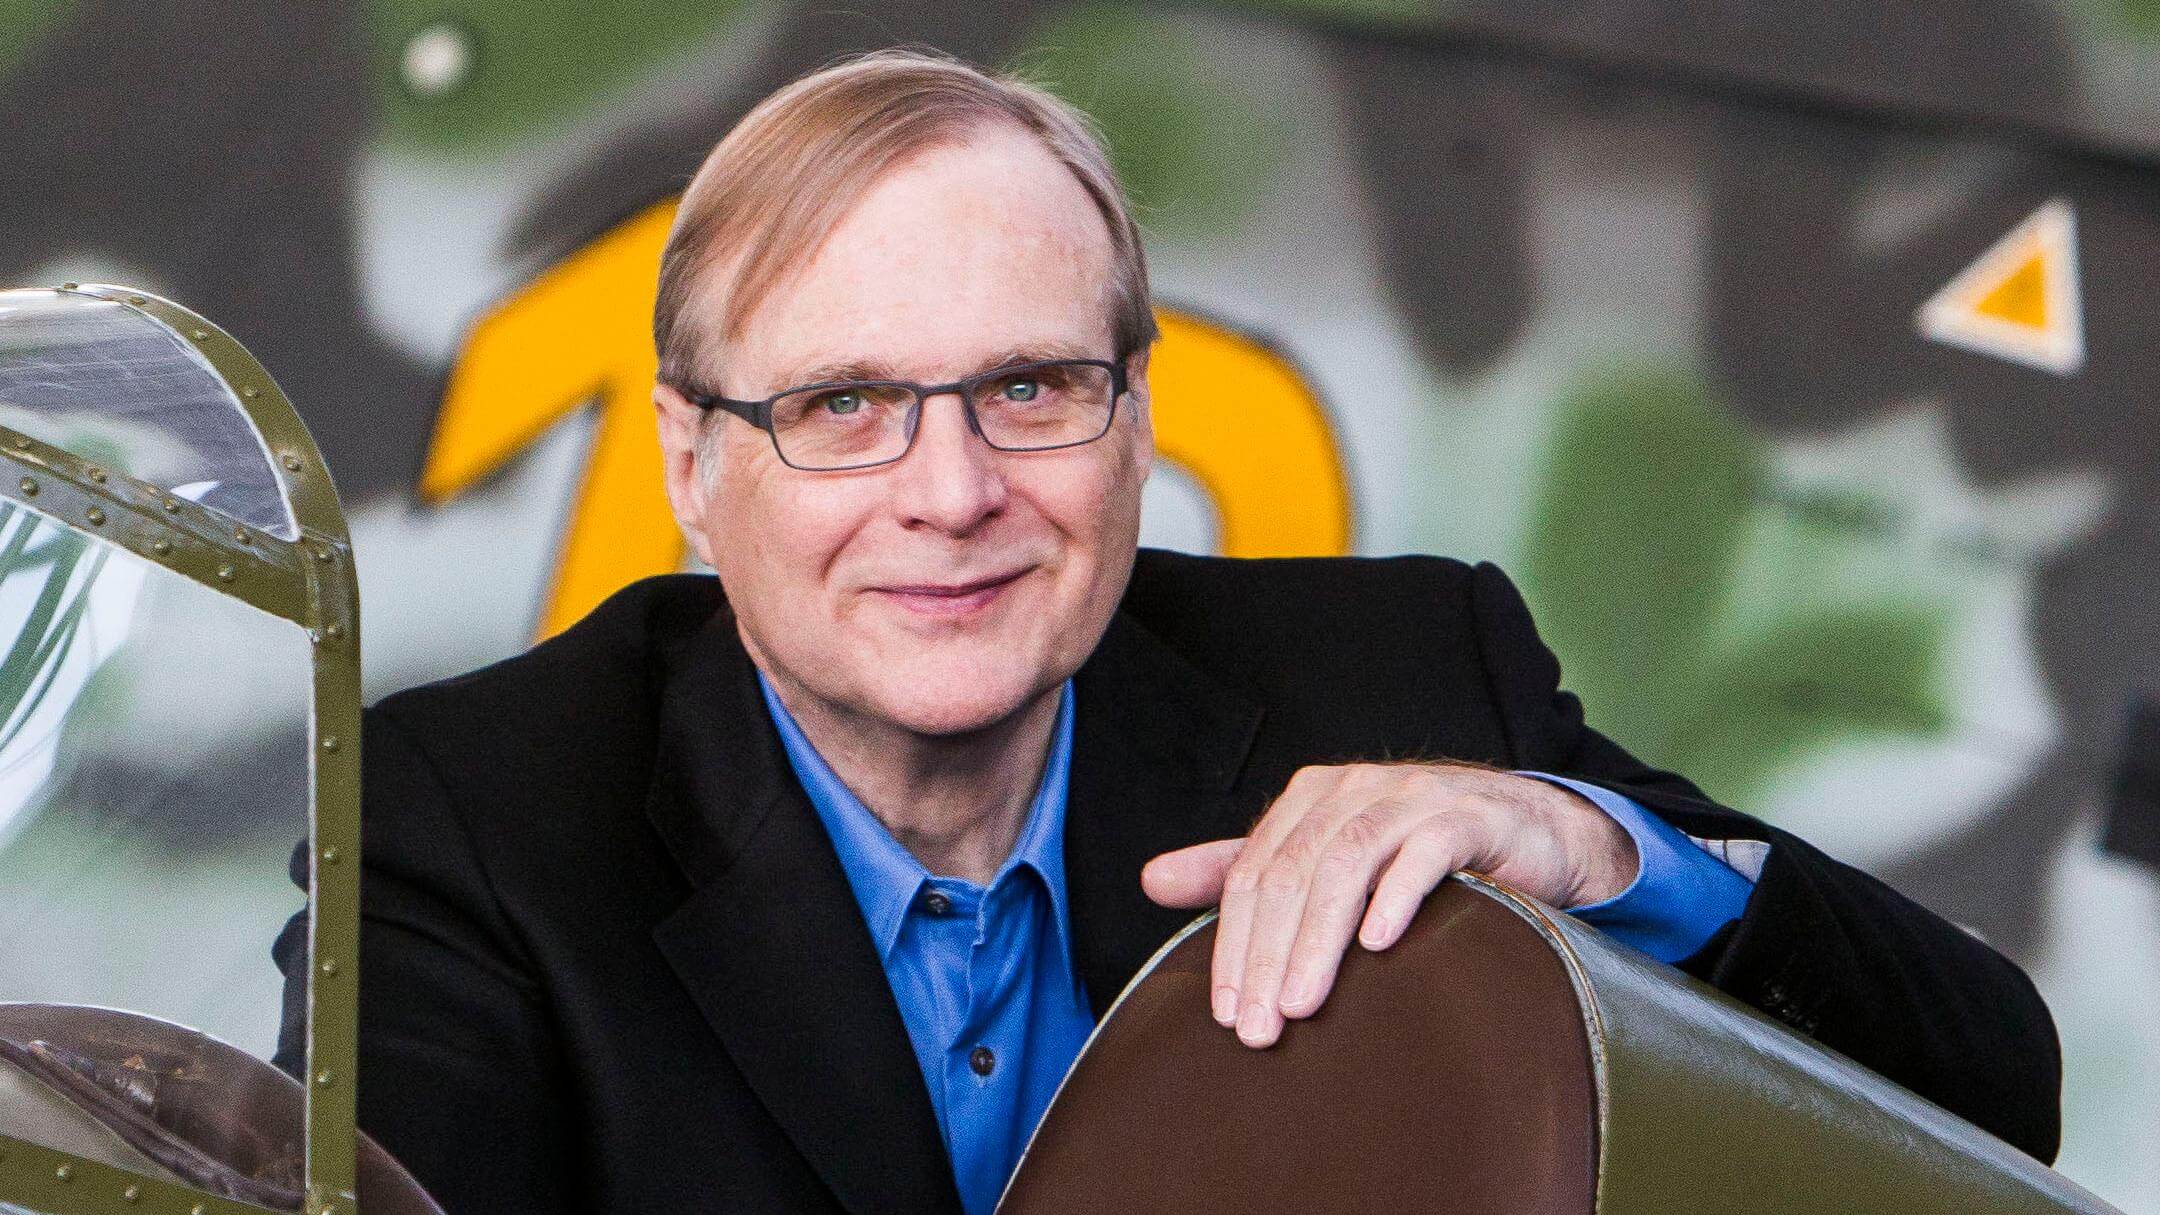 Co-founder of Microsoft, Paul Allen, Dead at 65